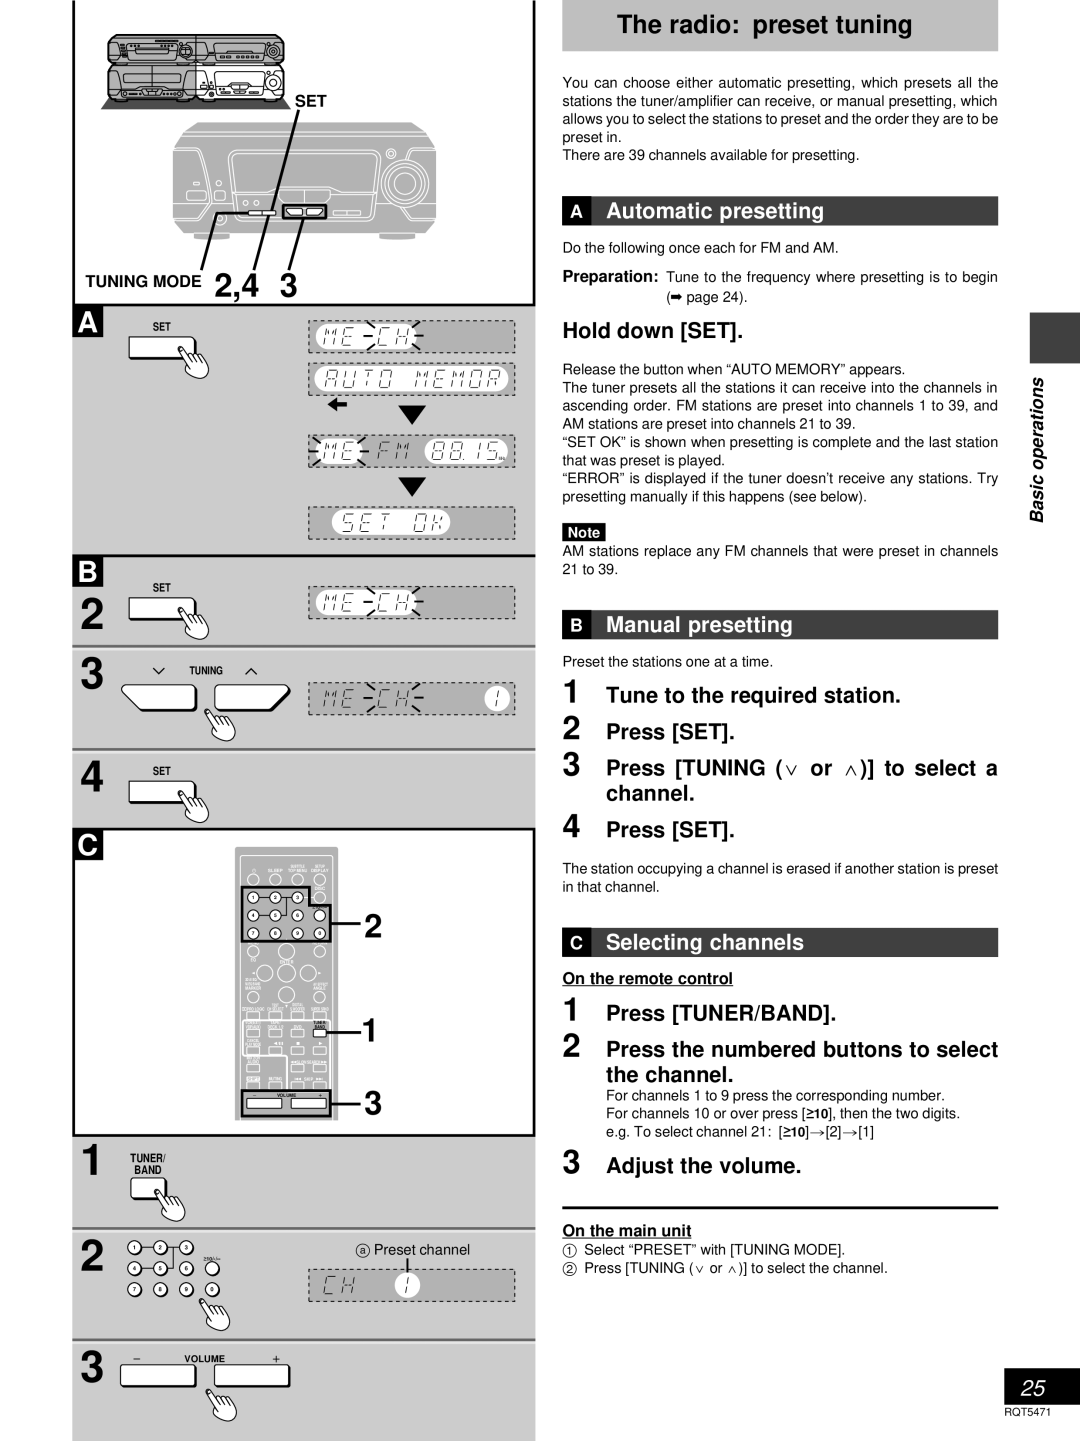 Technics SC-DV170 manual The radio: preset tuning, Hold down SET, Tune to the required station, Press SET, channel 